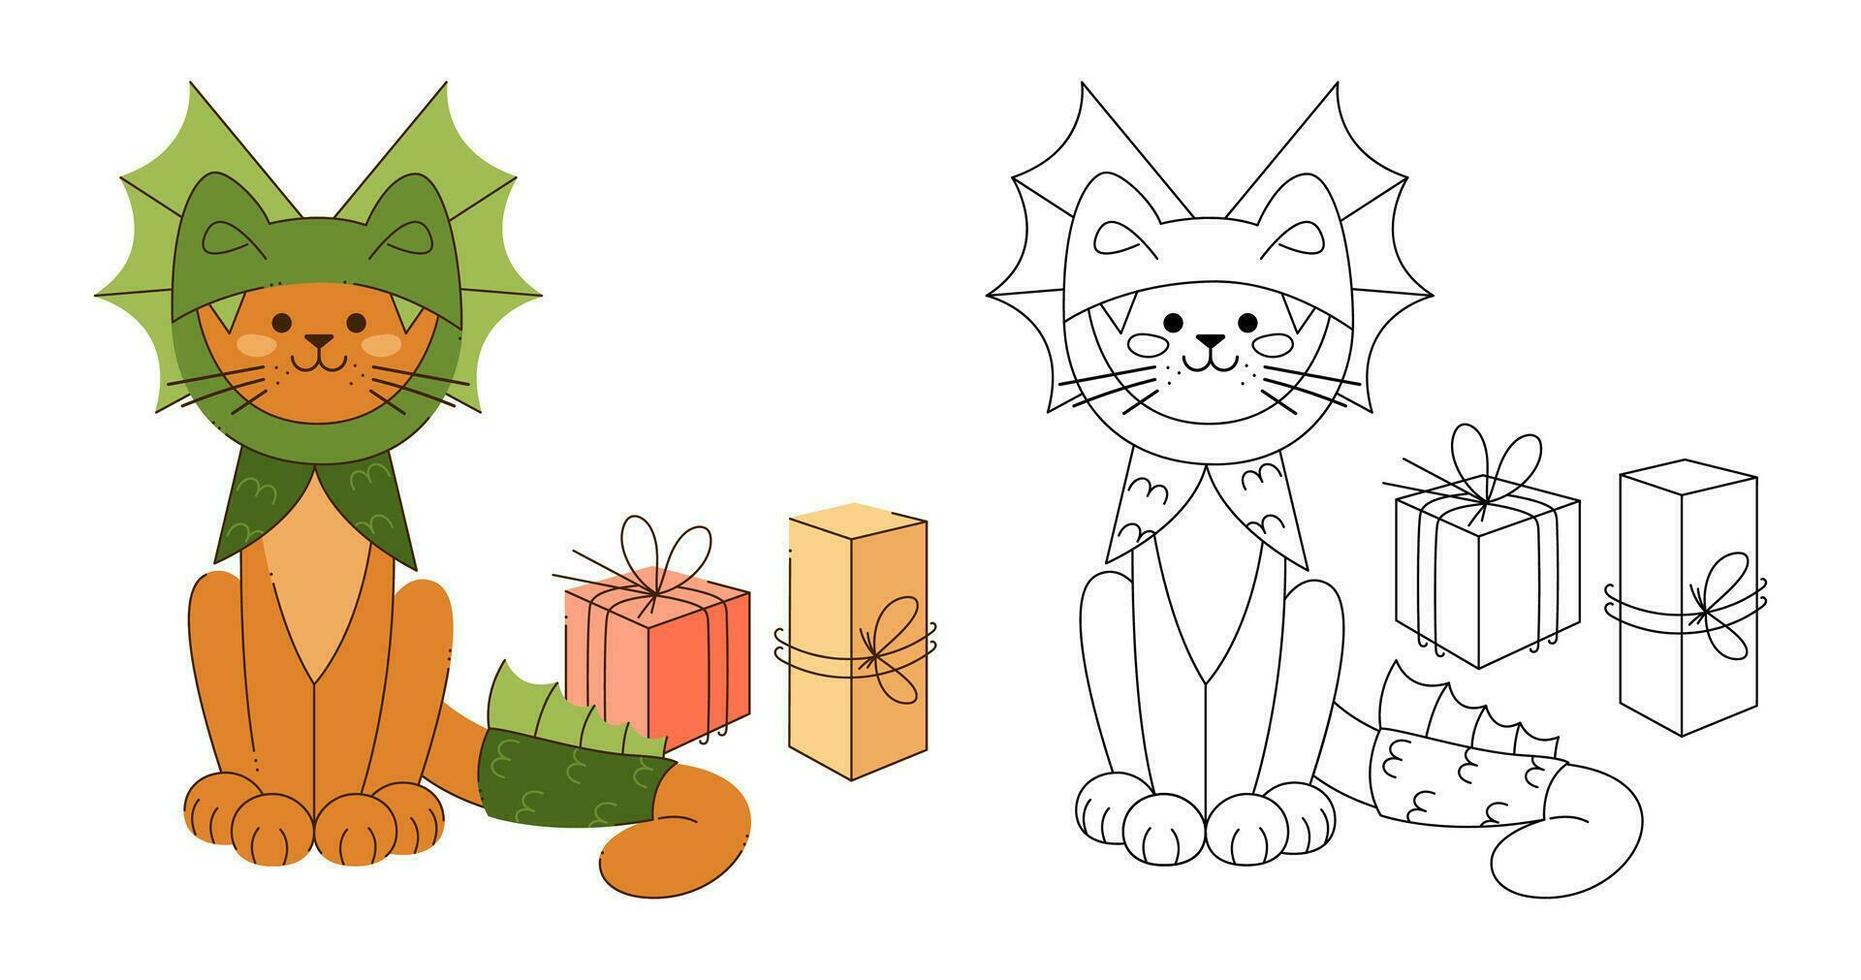 Cute cat character in a dragon costume with boxes of gifts. Color, black and white vector illustration.